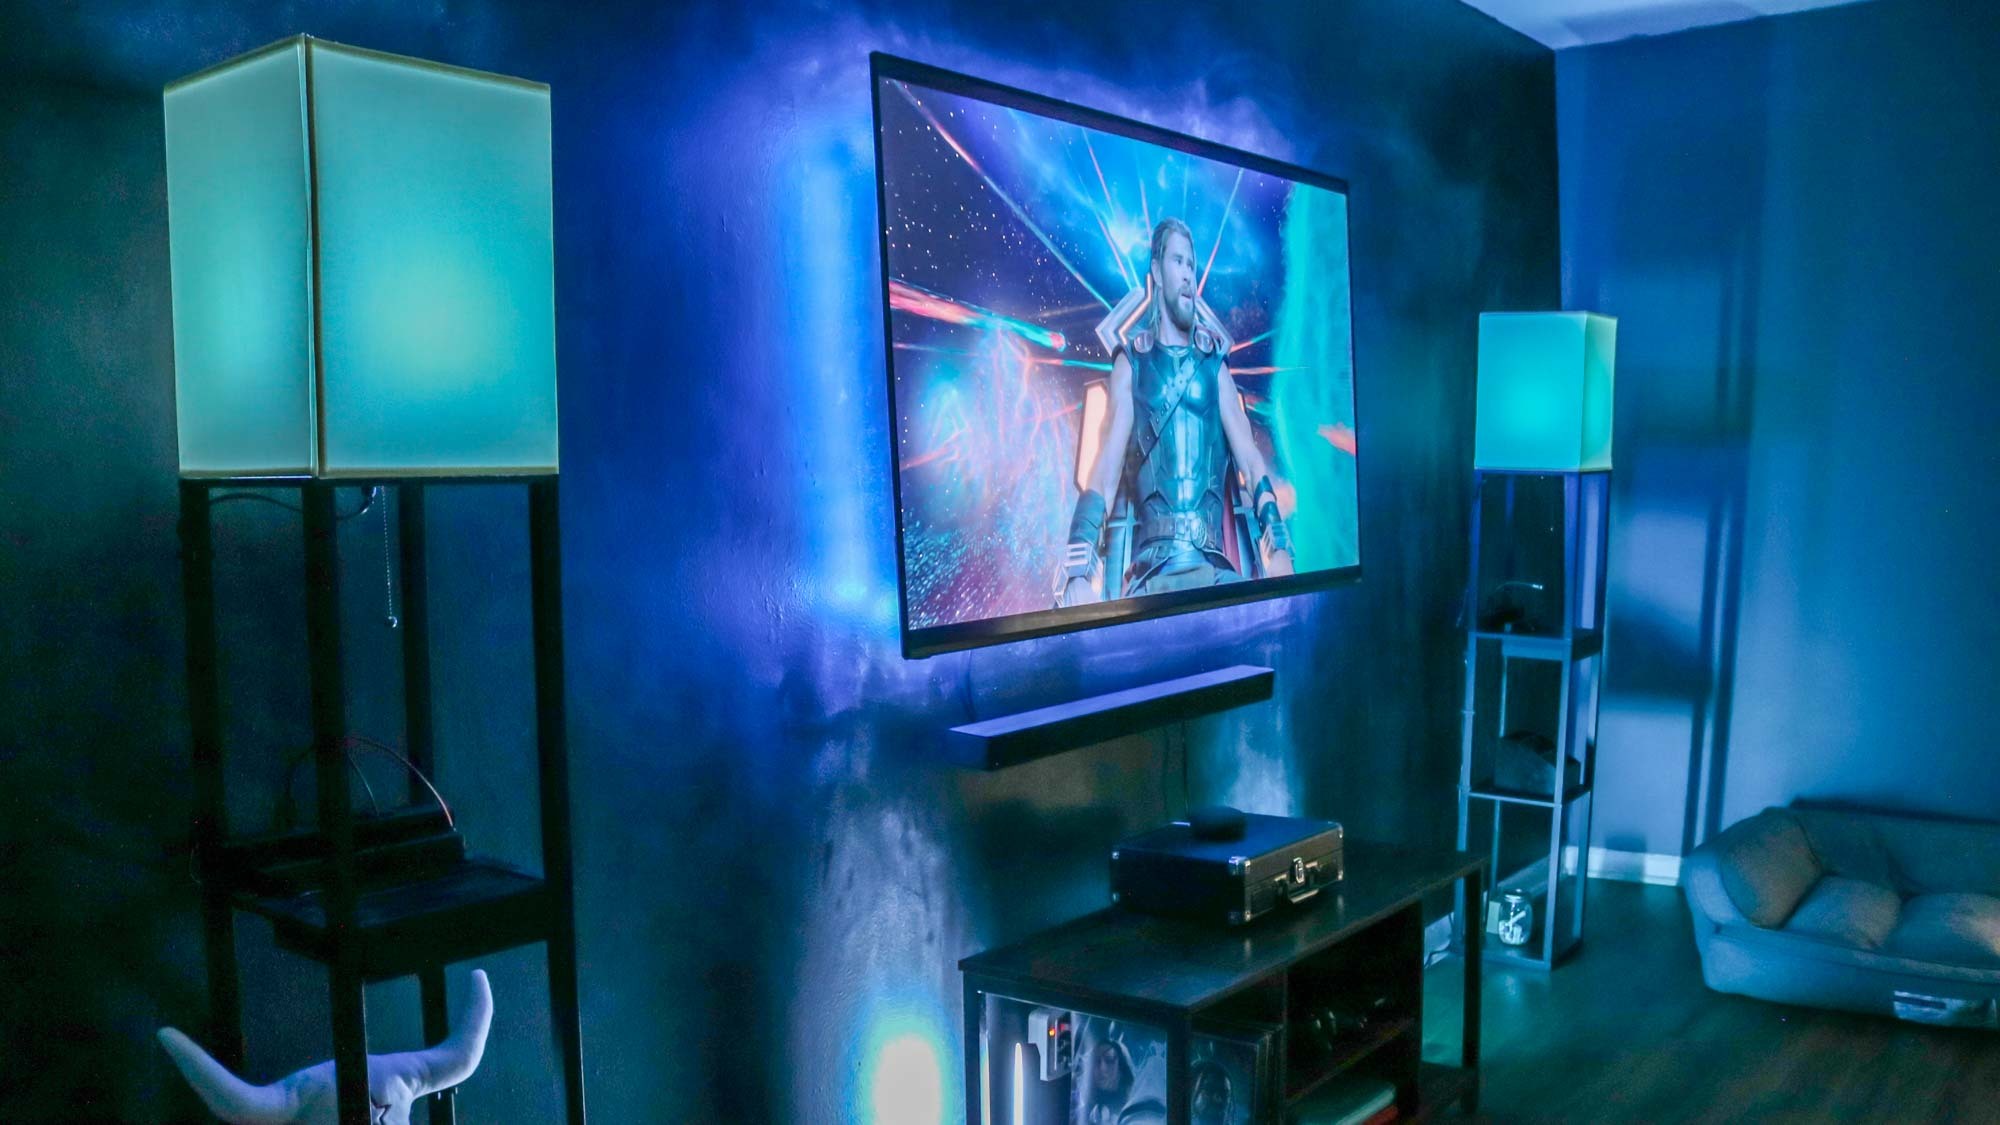 Sync Your Philips Hue Lights With Movies, Game